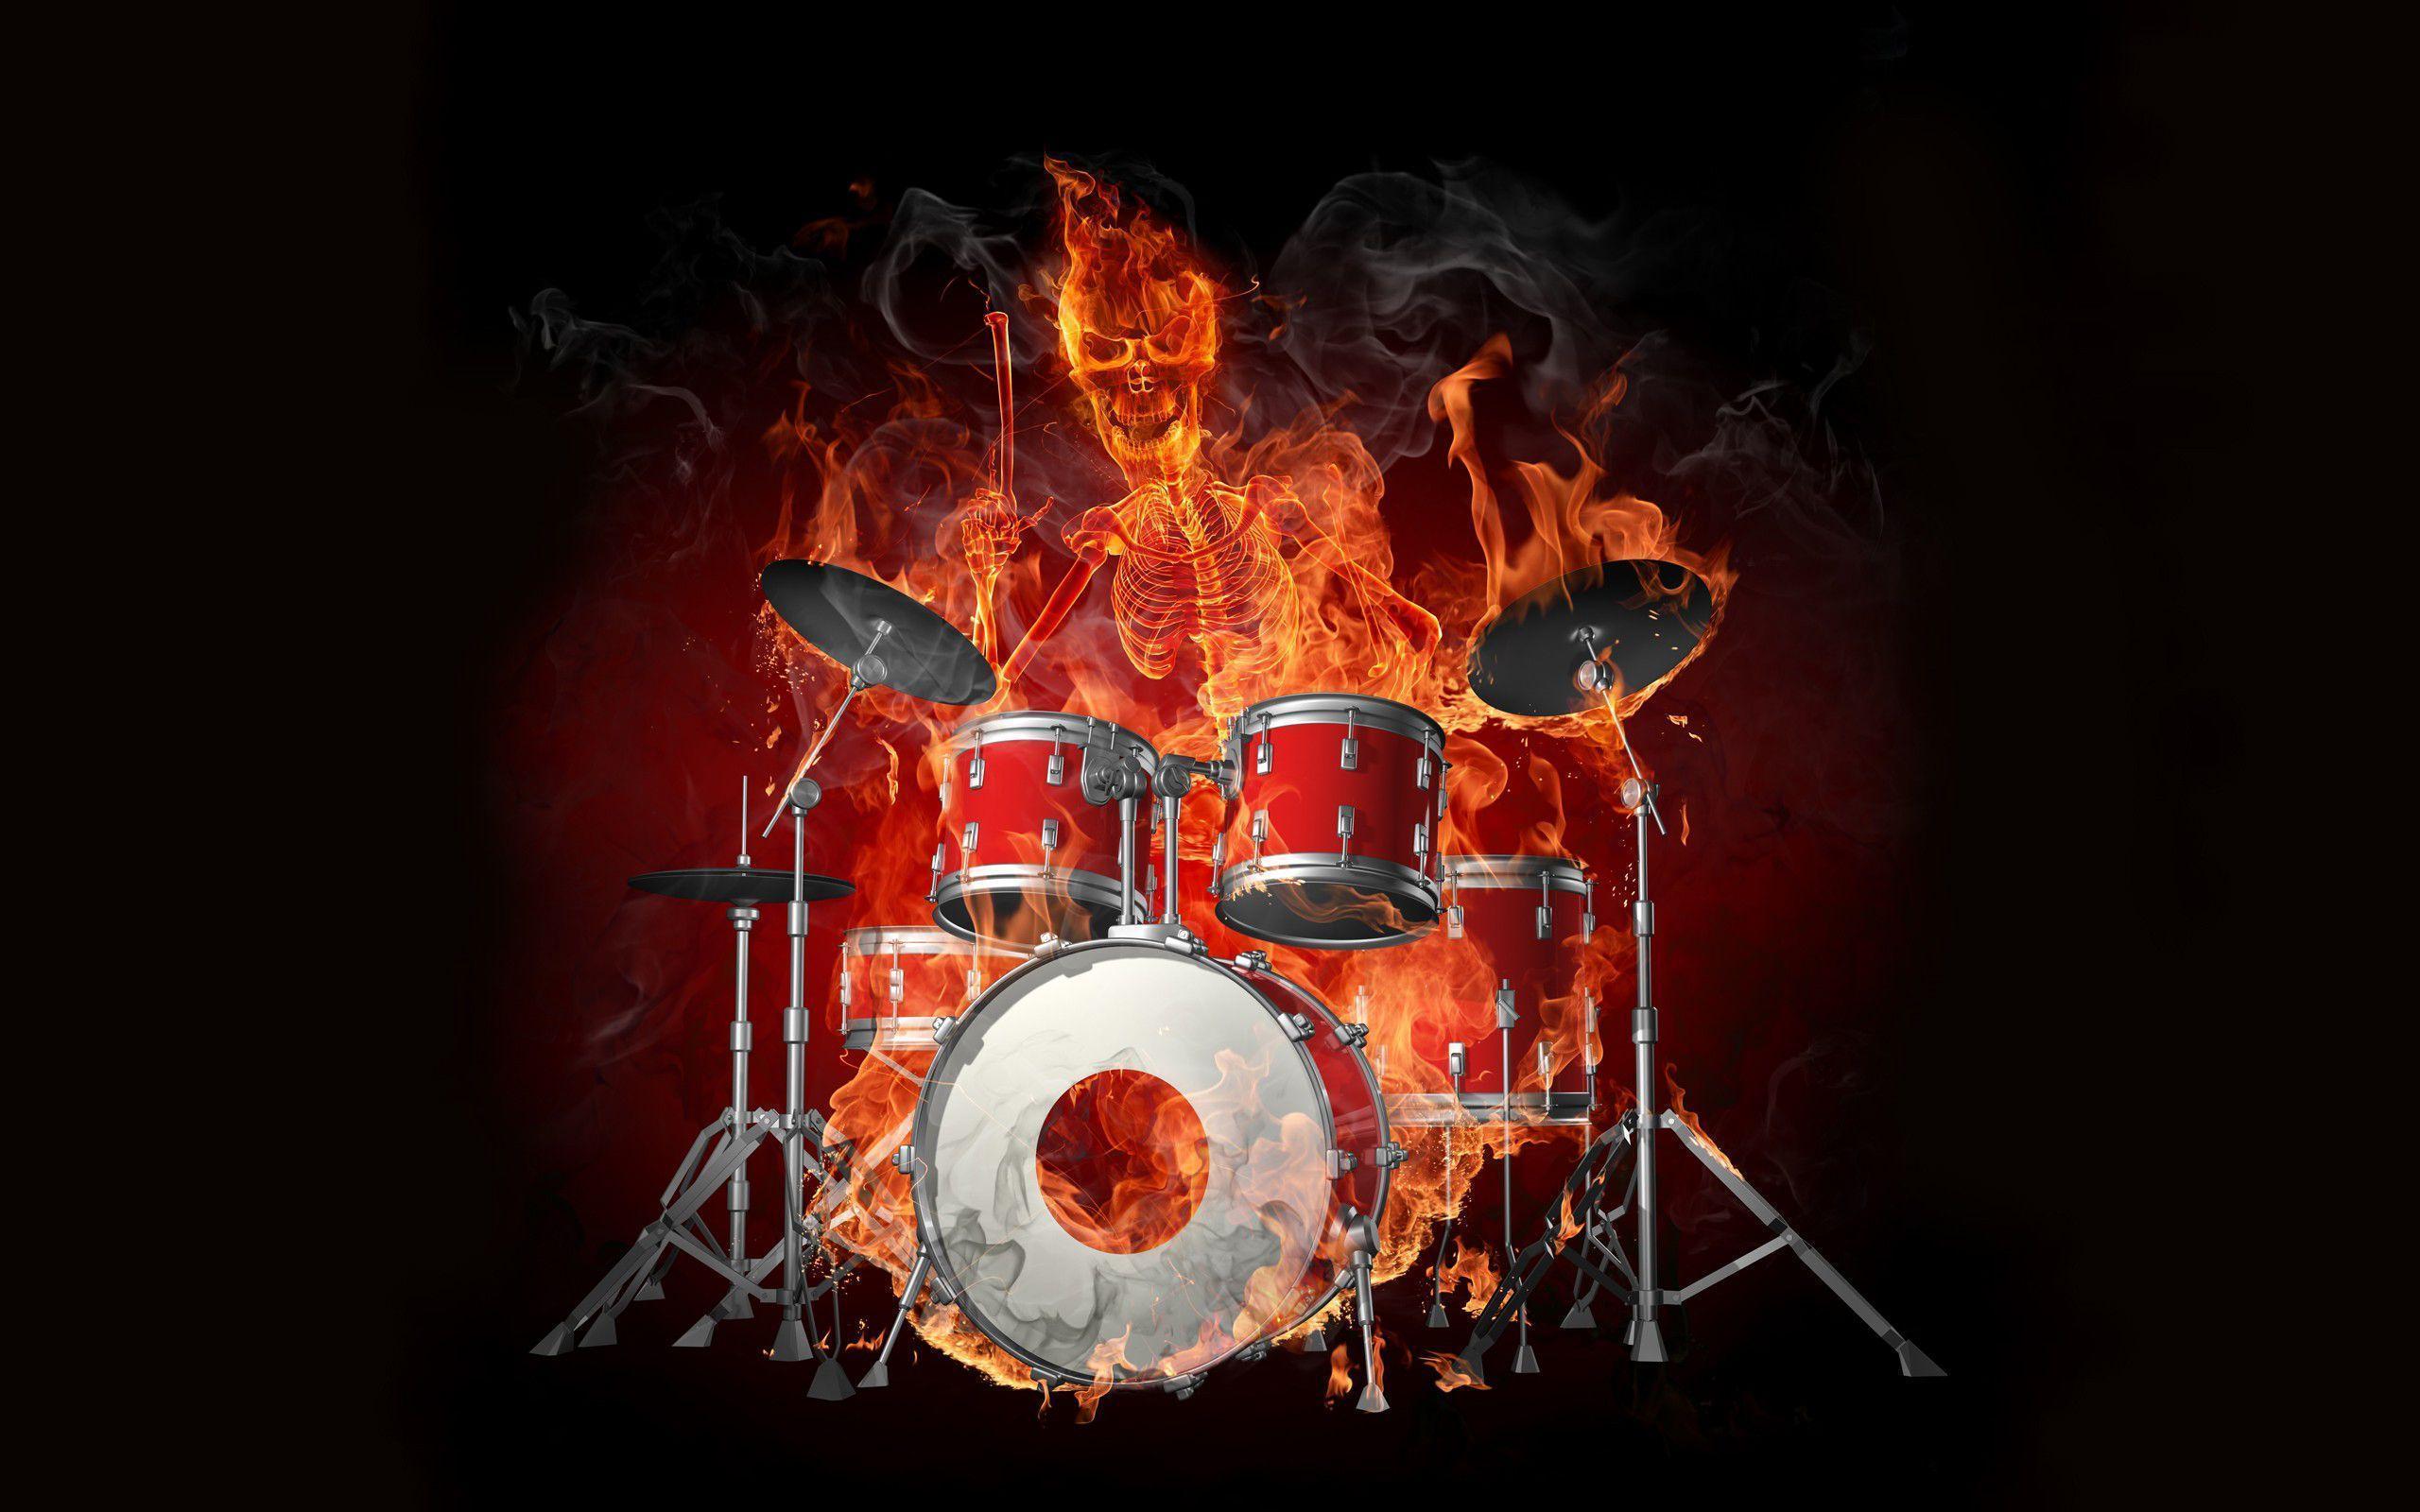 4K Drums Wallpaper High Quality